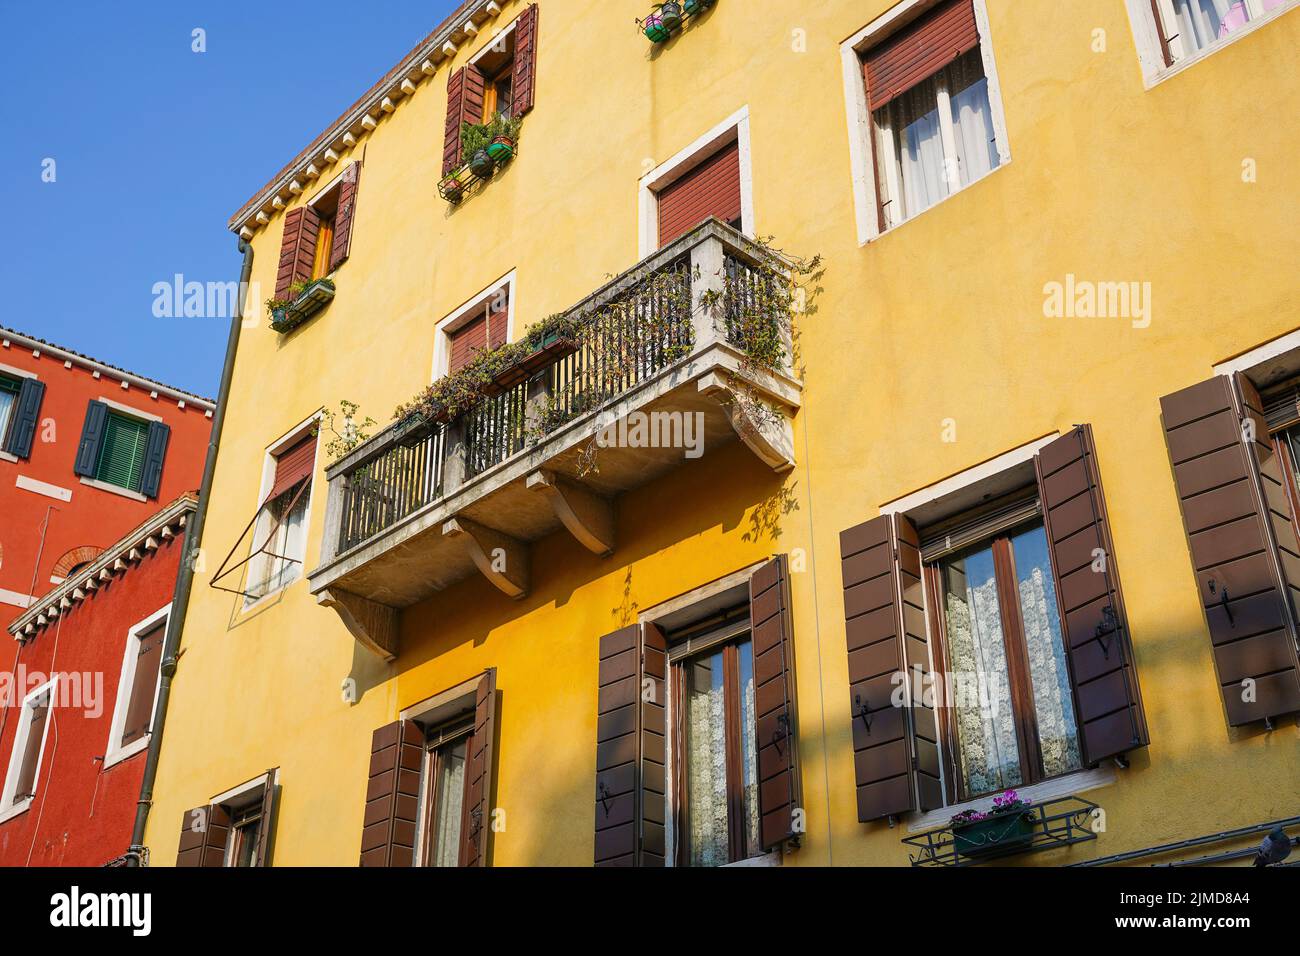 Colorful buildings that are typical in Venice, Italy Stock Photo